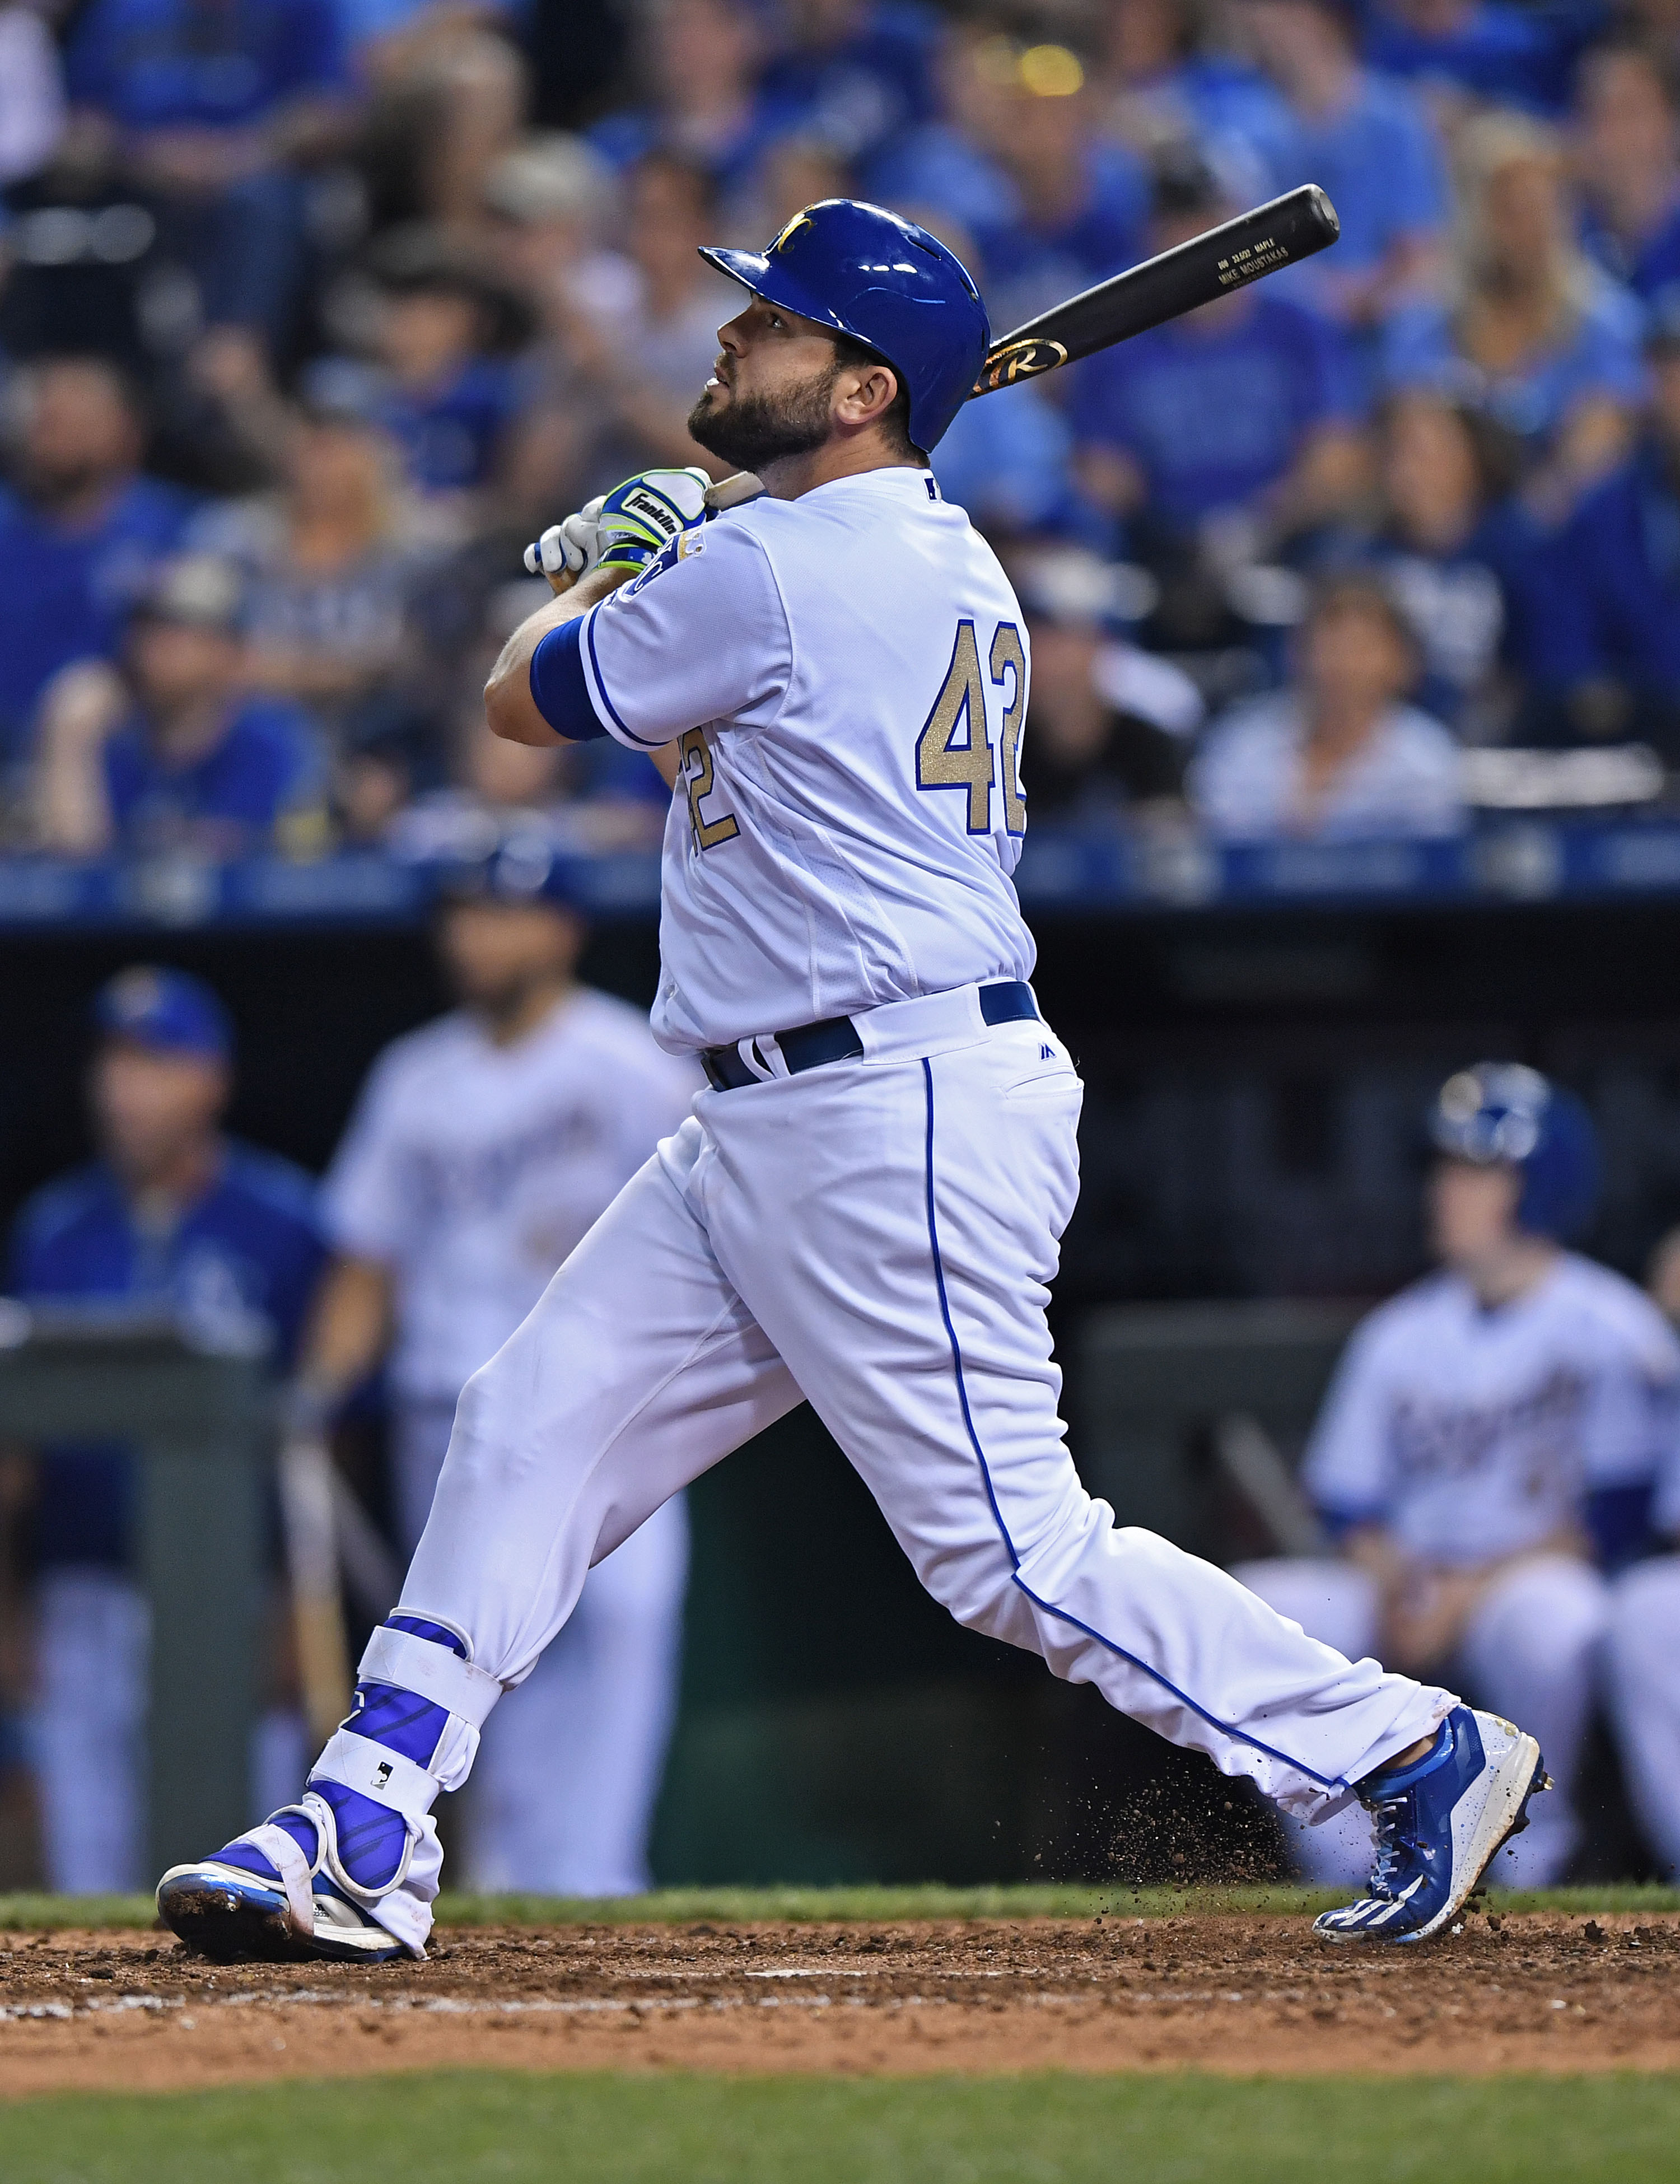 Moustakas' homer gives Royals 3-2 win over Angels